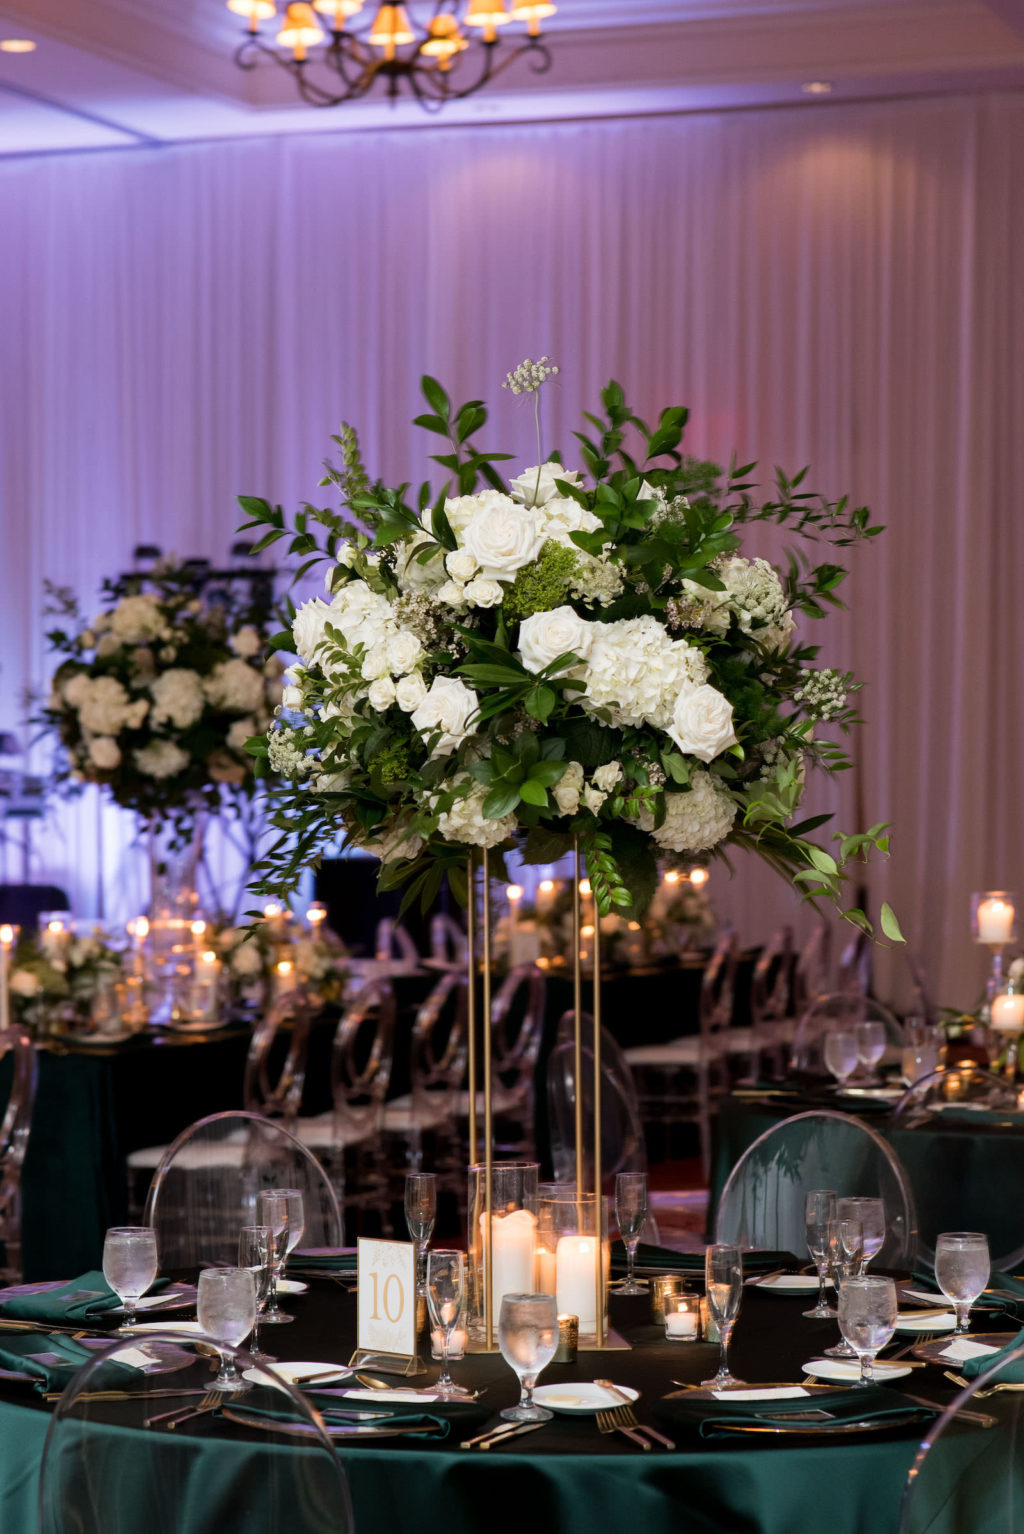 Elegant Wedding Reception Decor, Emerald Green Linens, Tall Gold Stand with White Roses, Hydrangeas and Greenery Floral Centerpiece | Tampa Bay Wedding Planner Parties A'la Carte | St. Wedding Venue The Vinoy | Wedding Rentals A Chair Affair